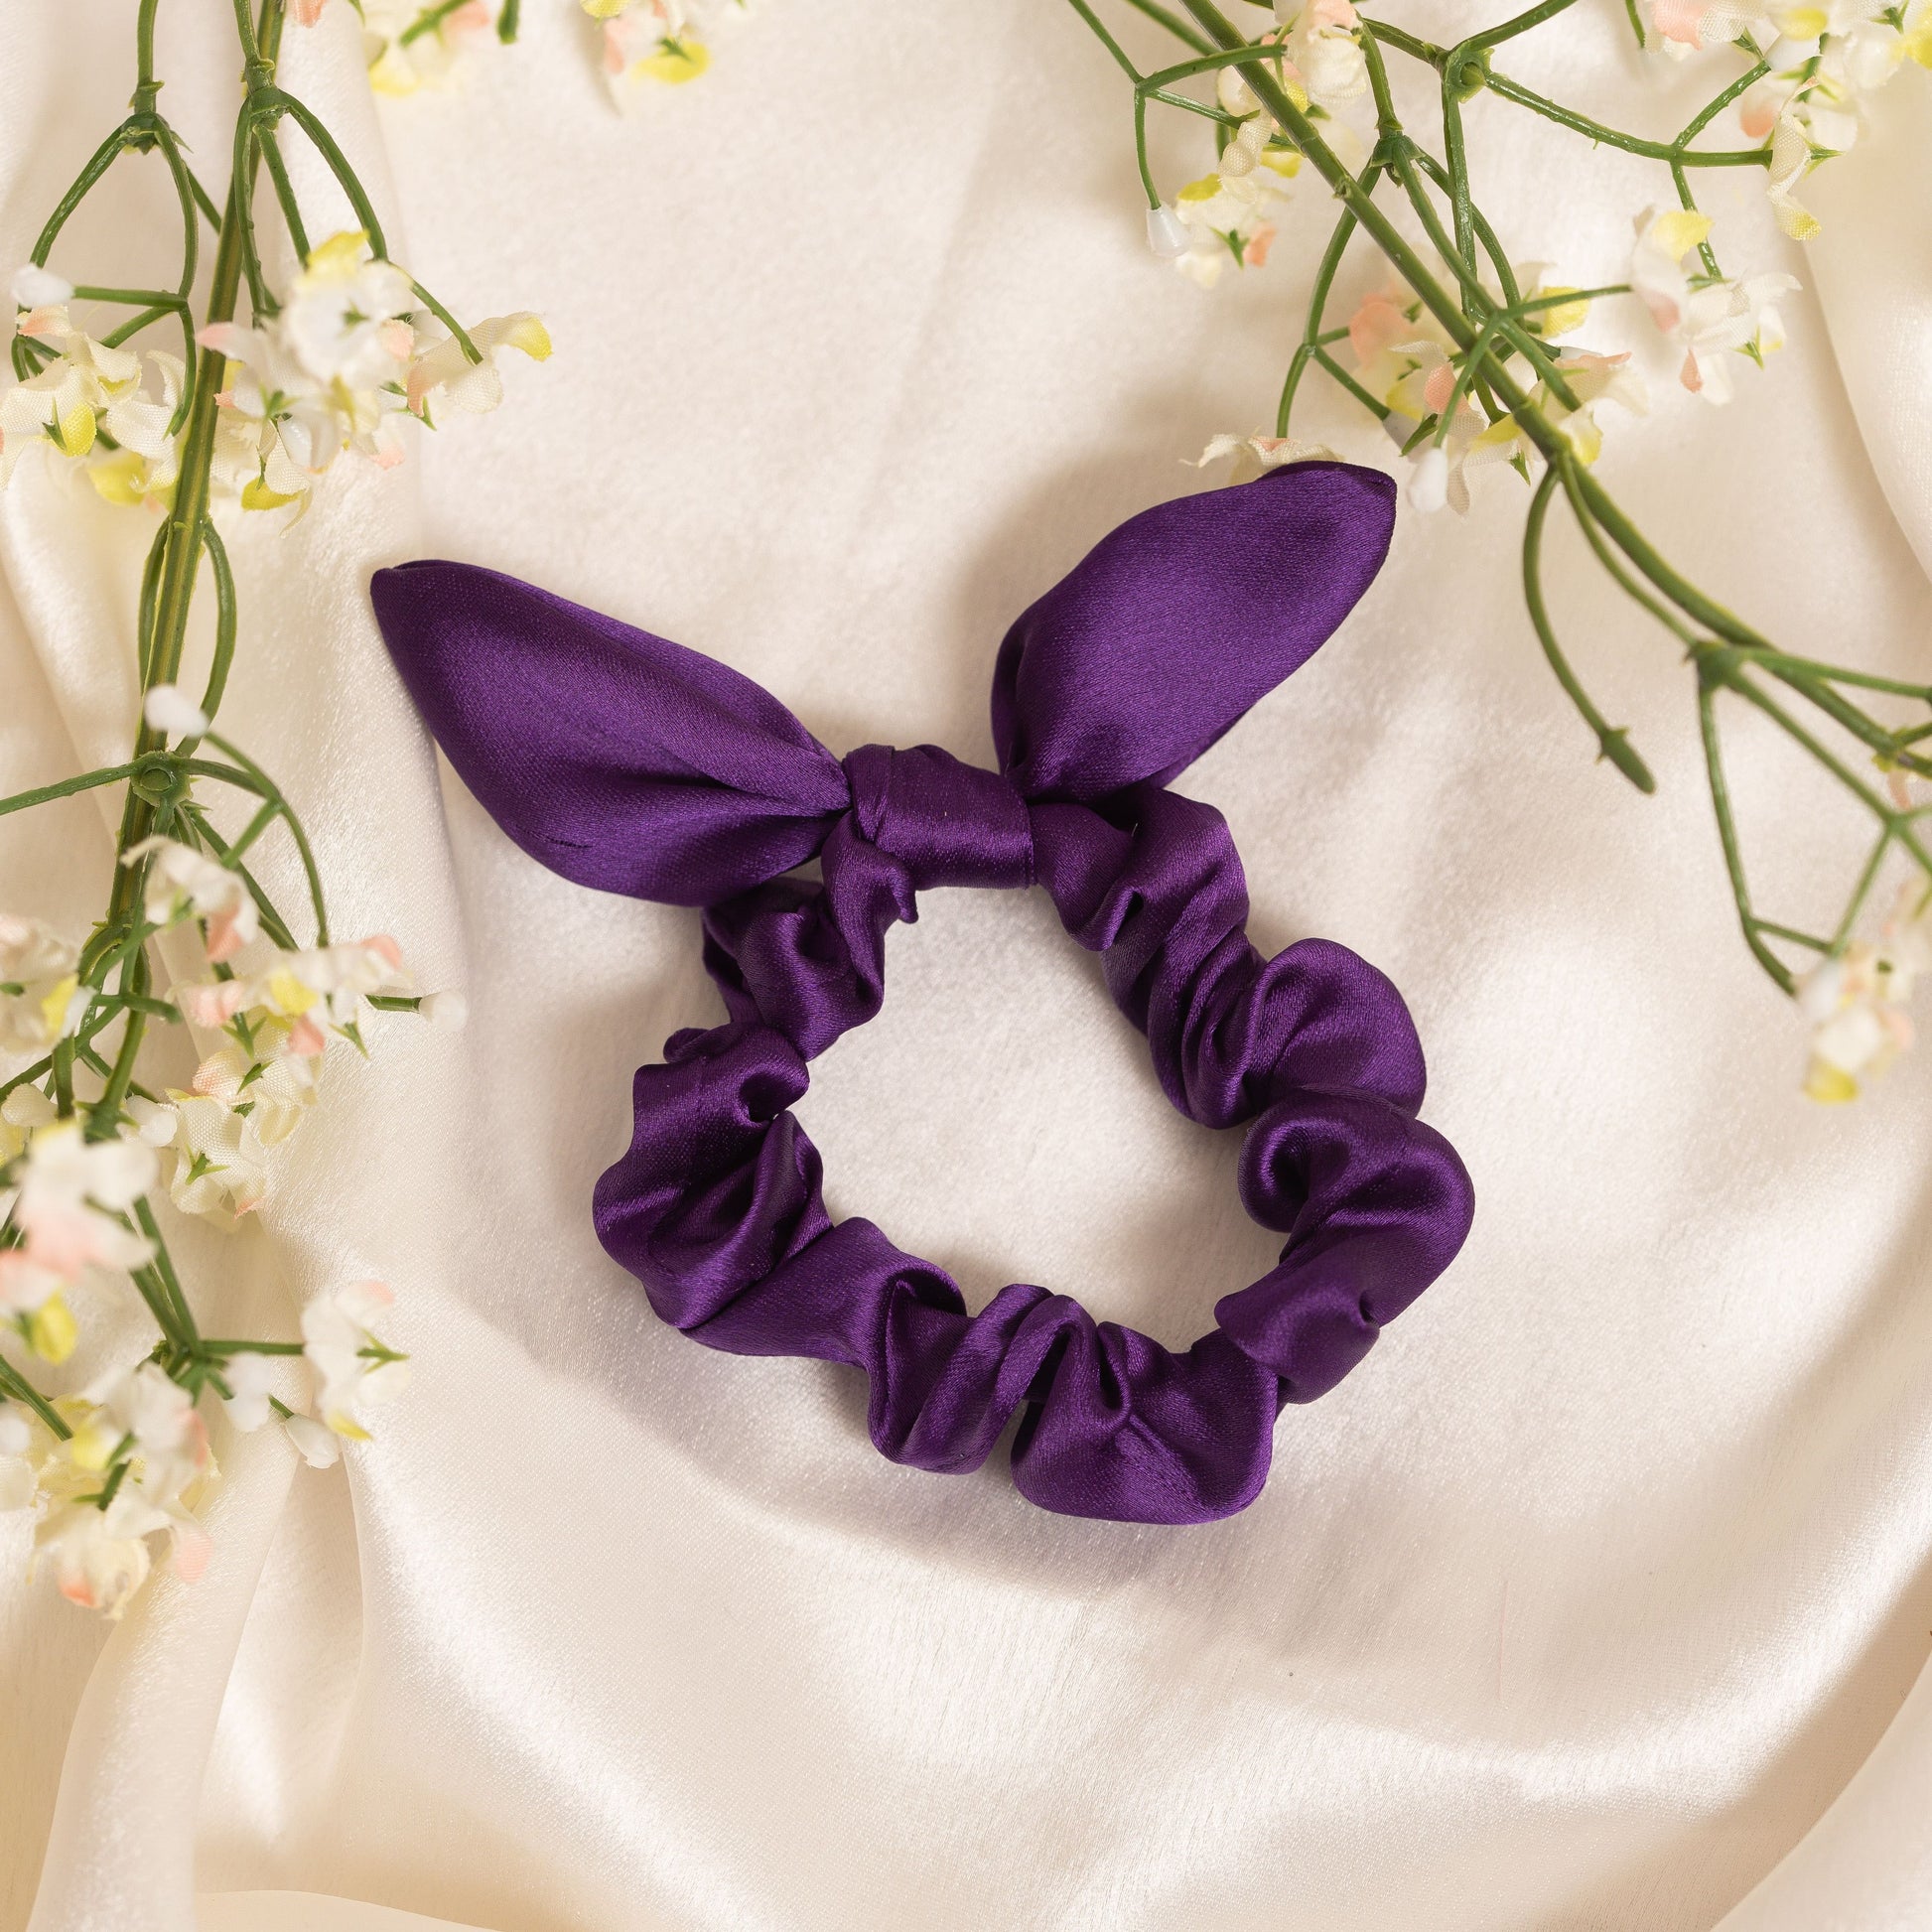 Ribbon Candy - Satin Scrunchie With Tie Knot Detail - Purple